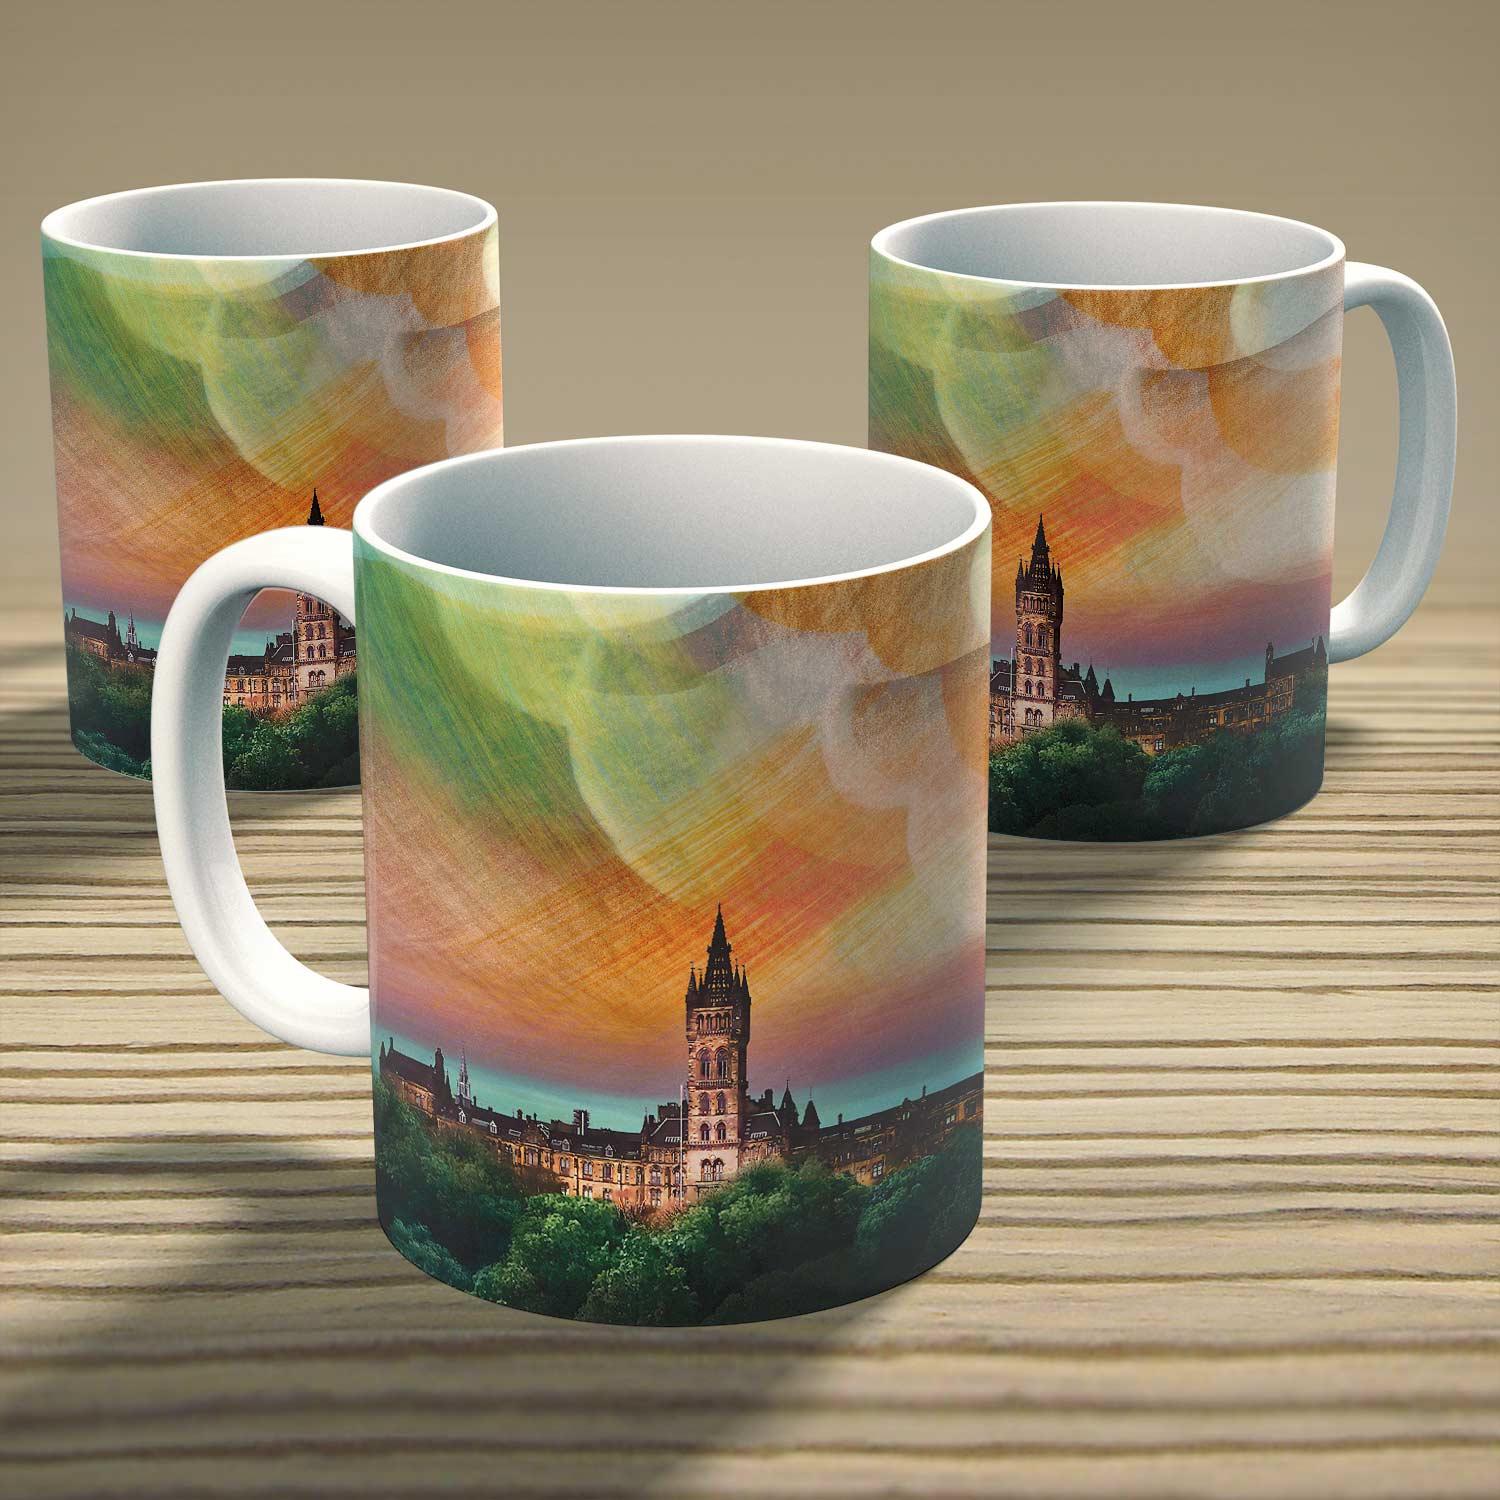 Glasgow University, Glasgow Mug from an original painting by artist Esther Cohen